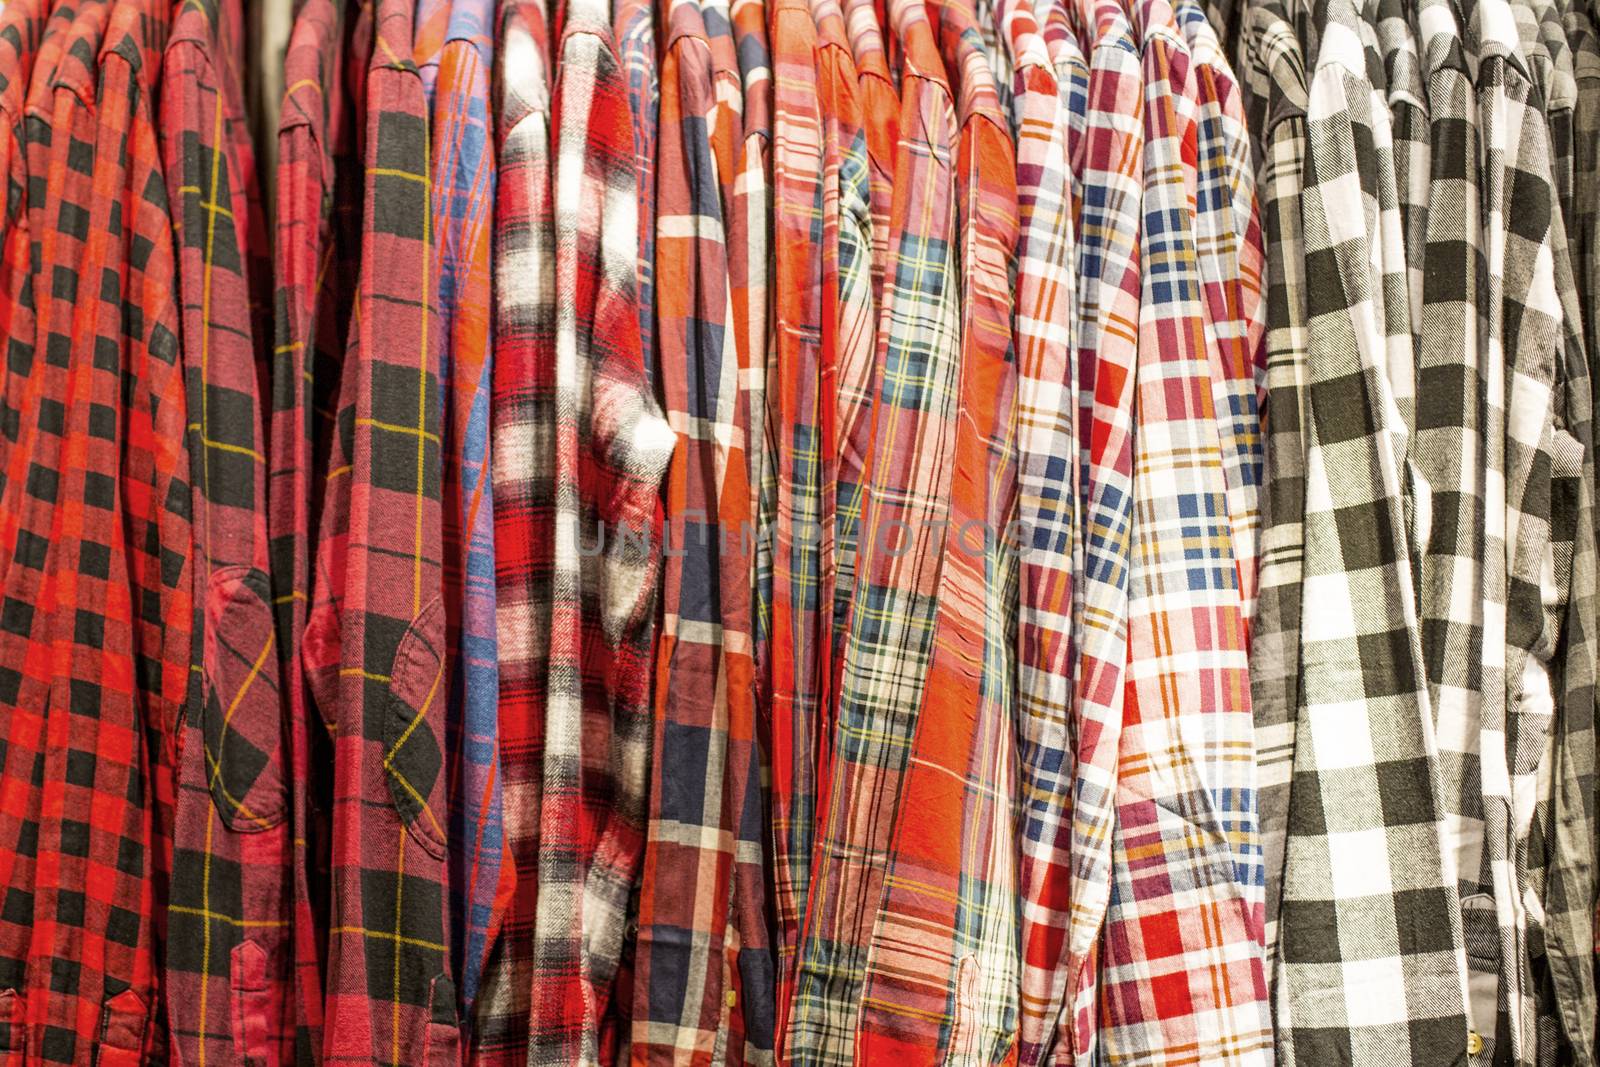 Shop Hanging Rail With Mixed Coloured Checked Mens Shirts